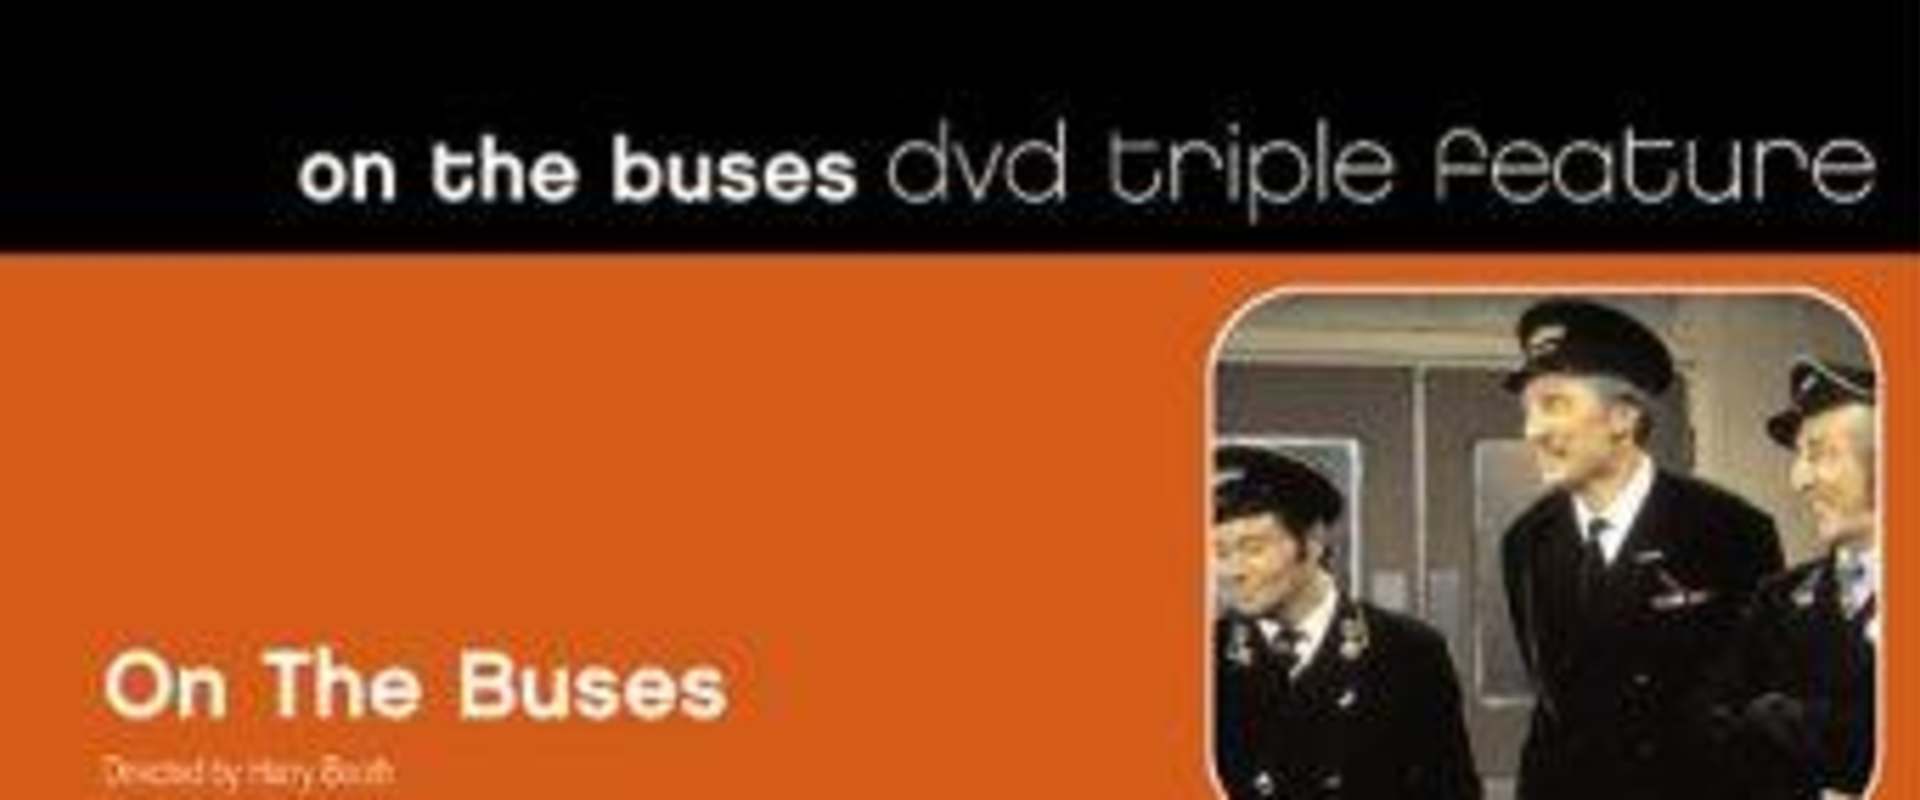 Holiday on the Buses background 2